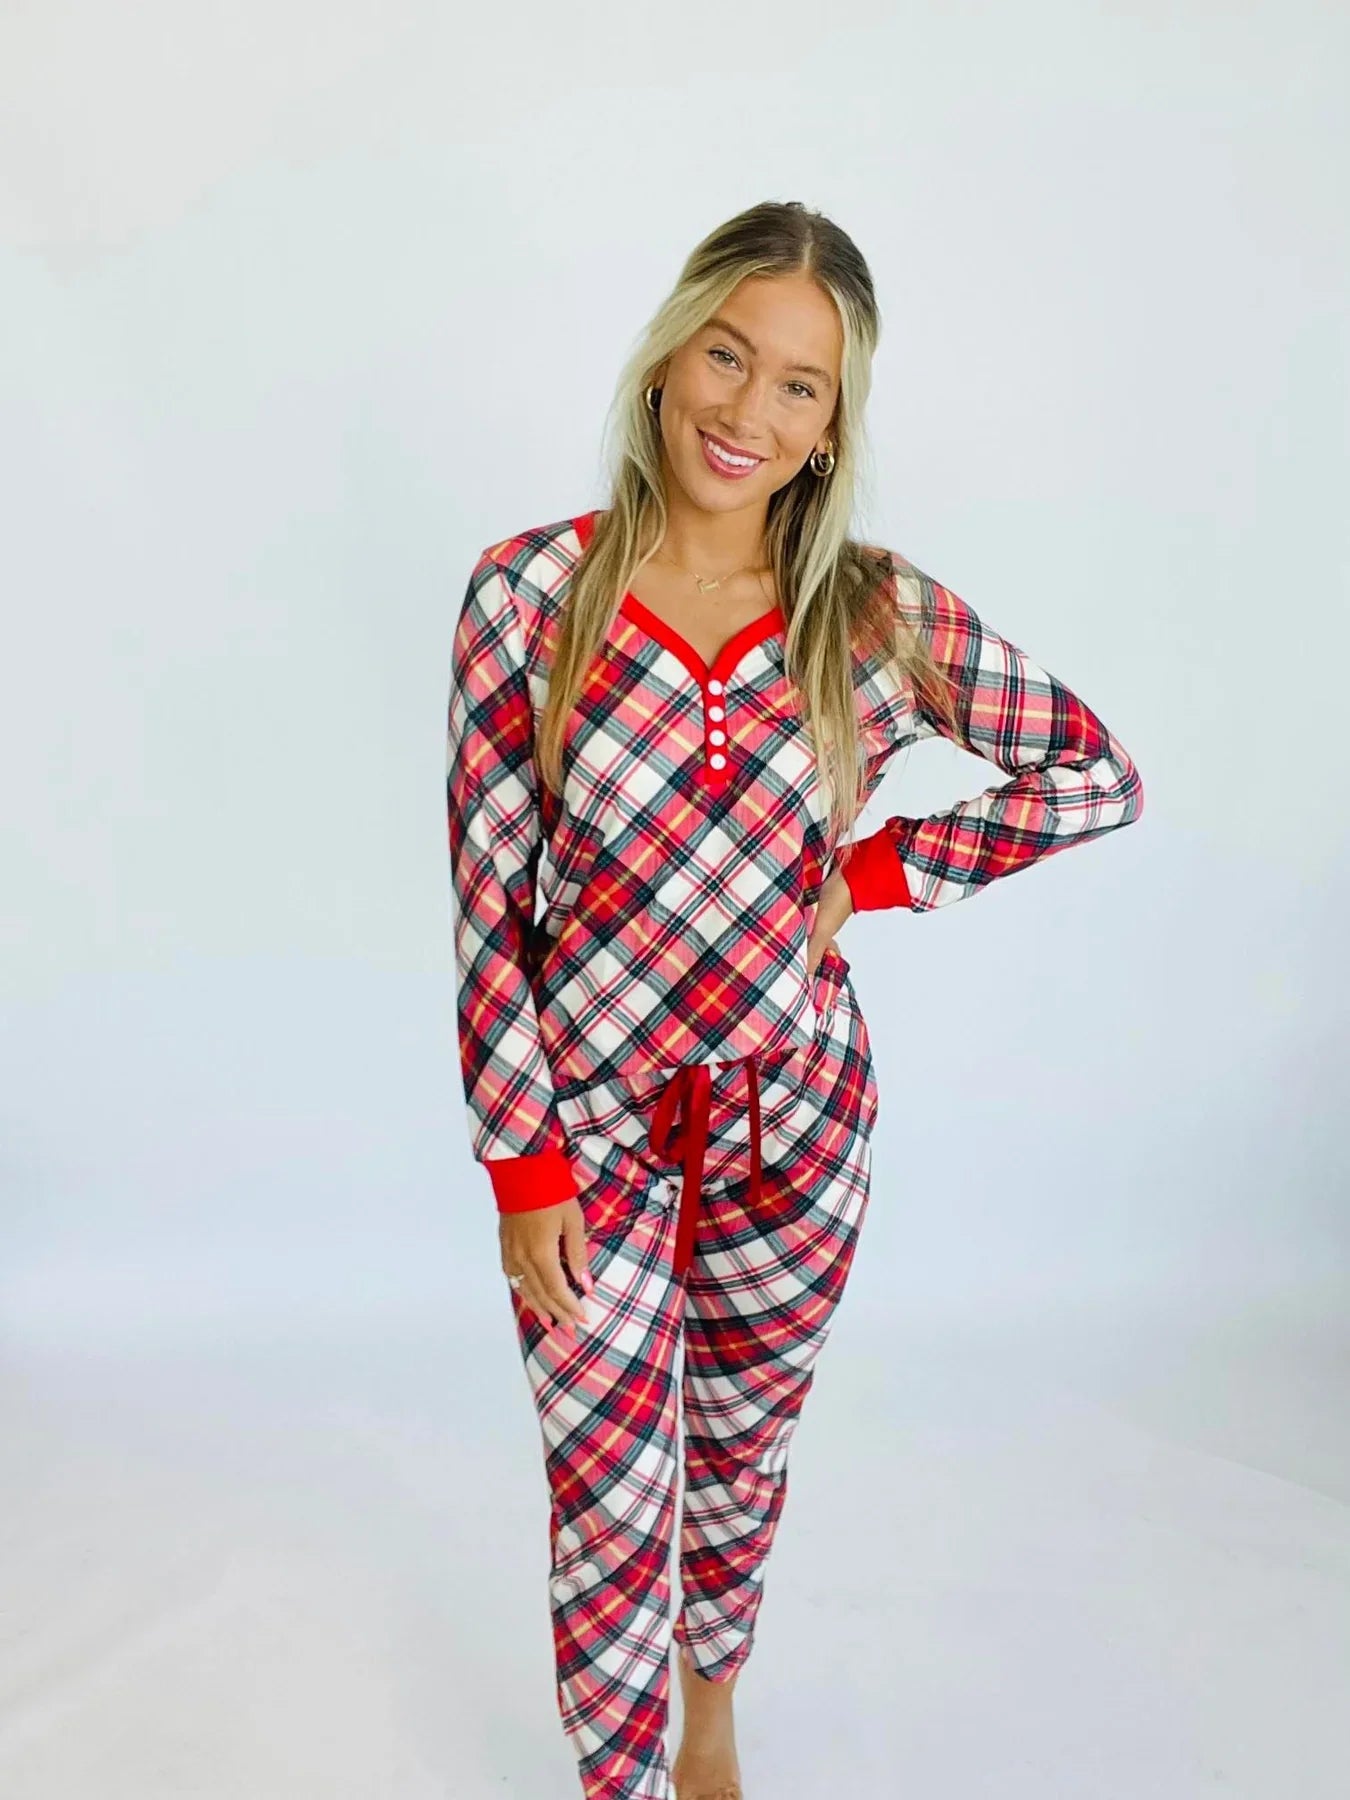 PREORDER: Long Sleeve Holiday Pajamas in Assorted Prints